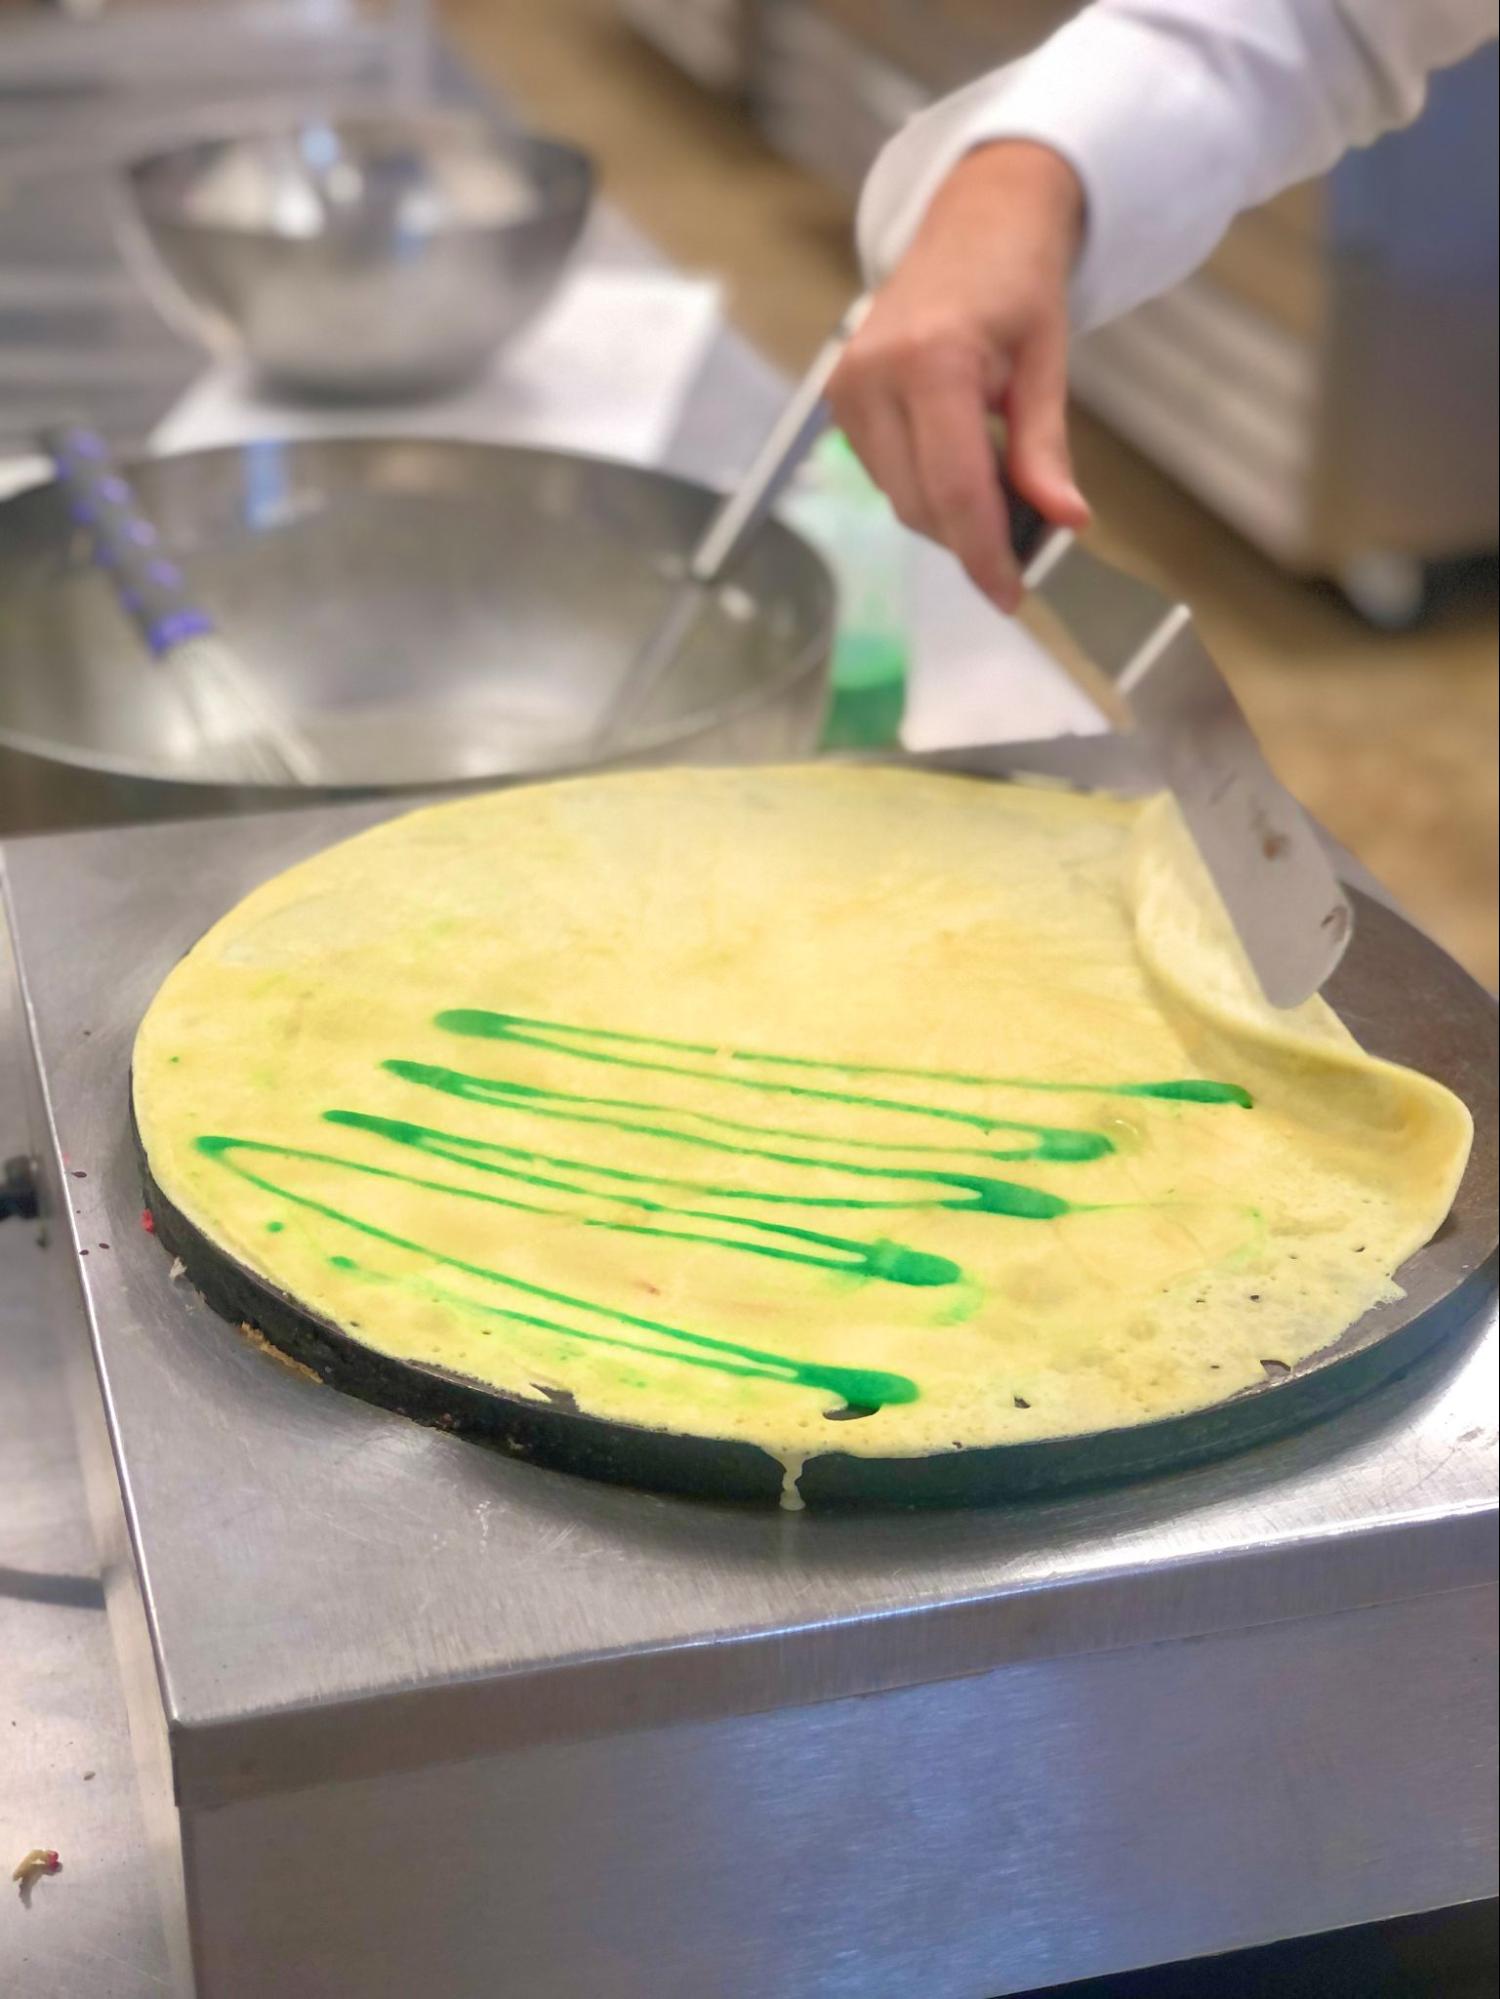 A crepe being flipped on a crepes pan.